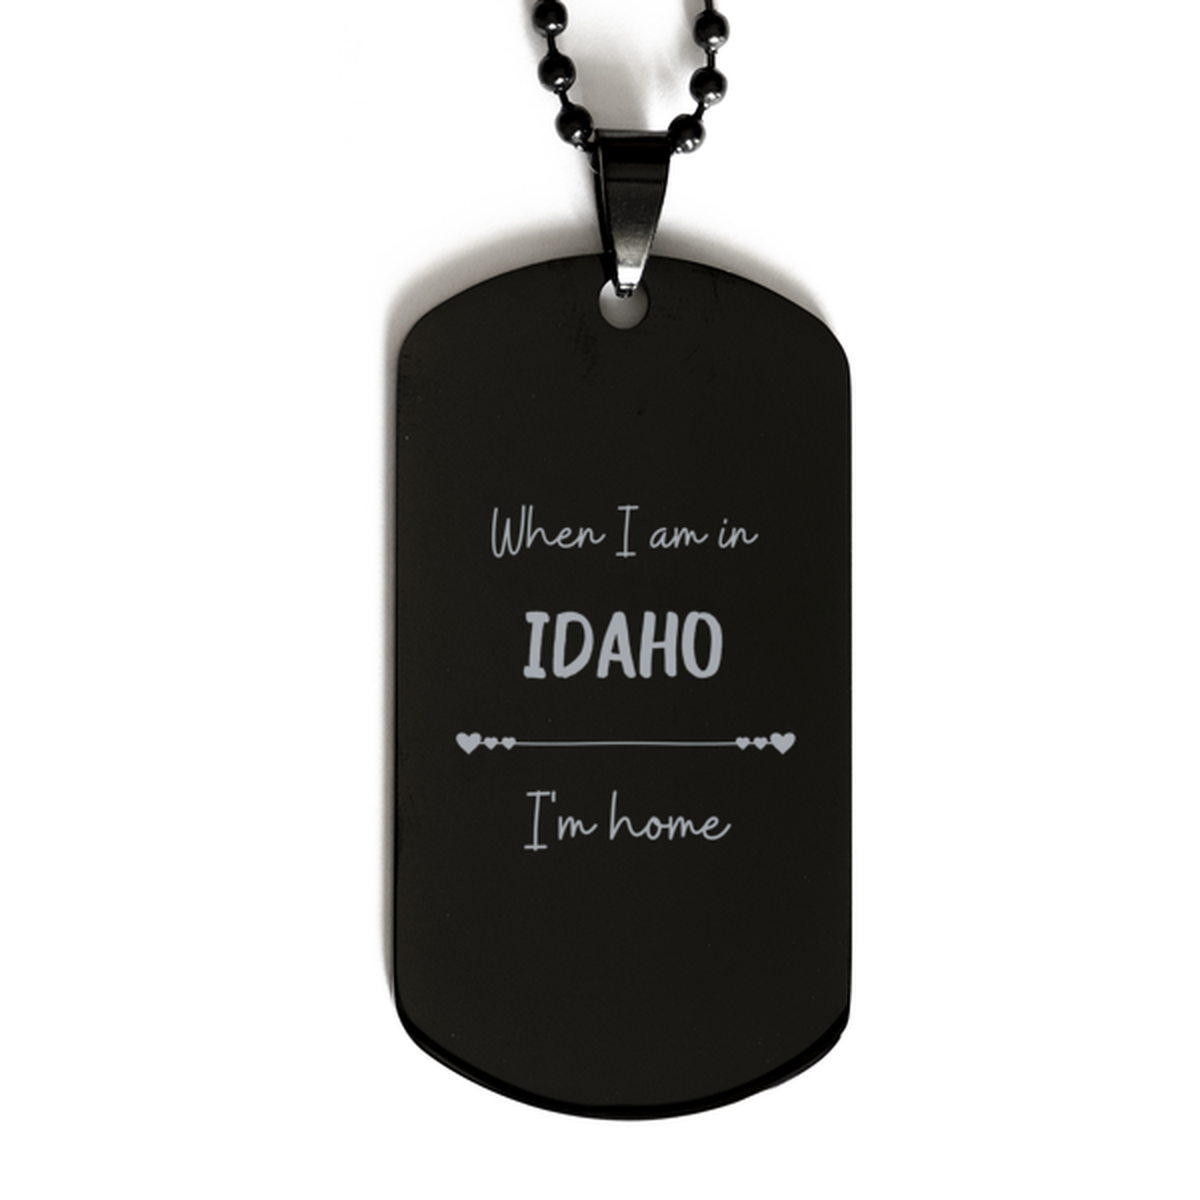 When I am in Idaho I'm home Black Dog Tag, Cheap Gifts For Idaho, State Idaho Birthday Gifts for Friends Coworker